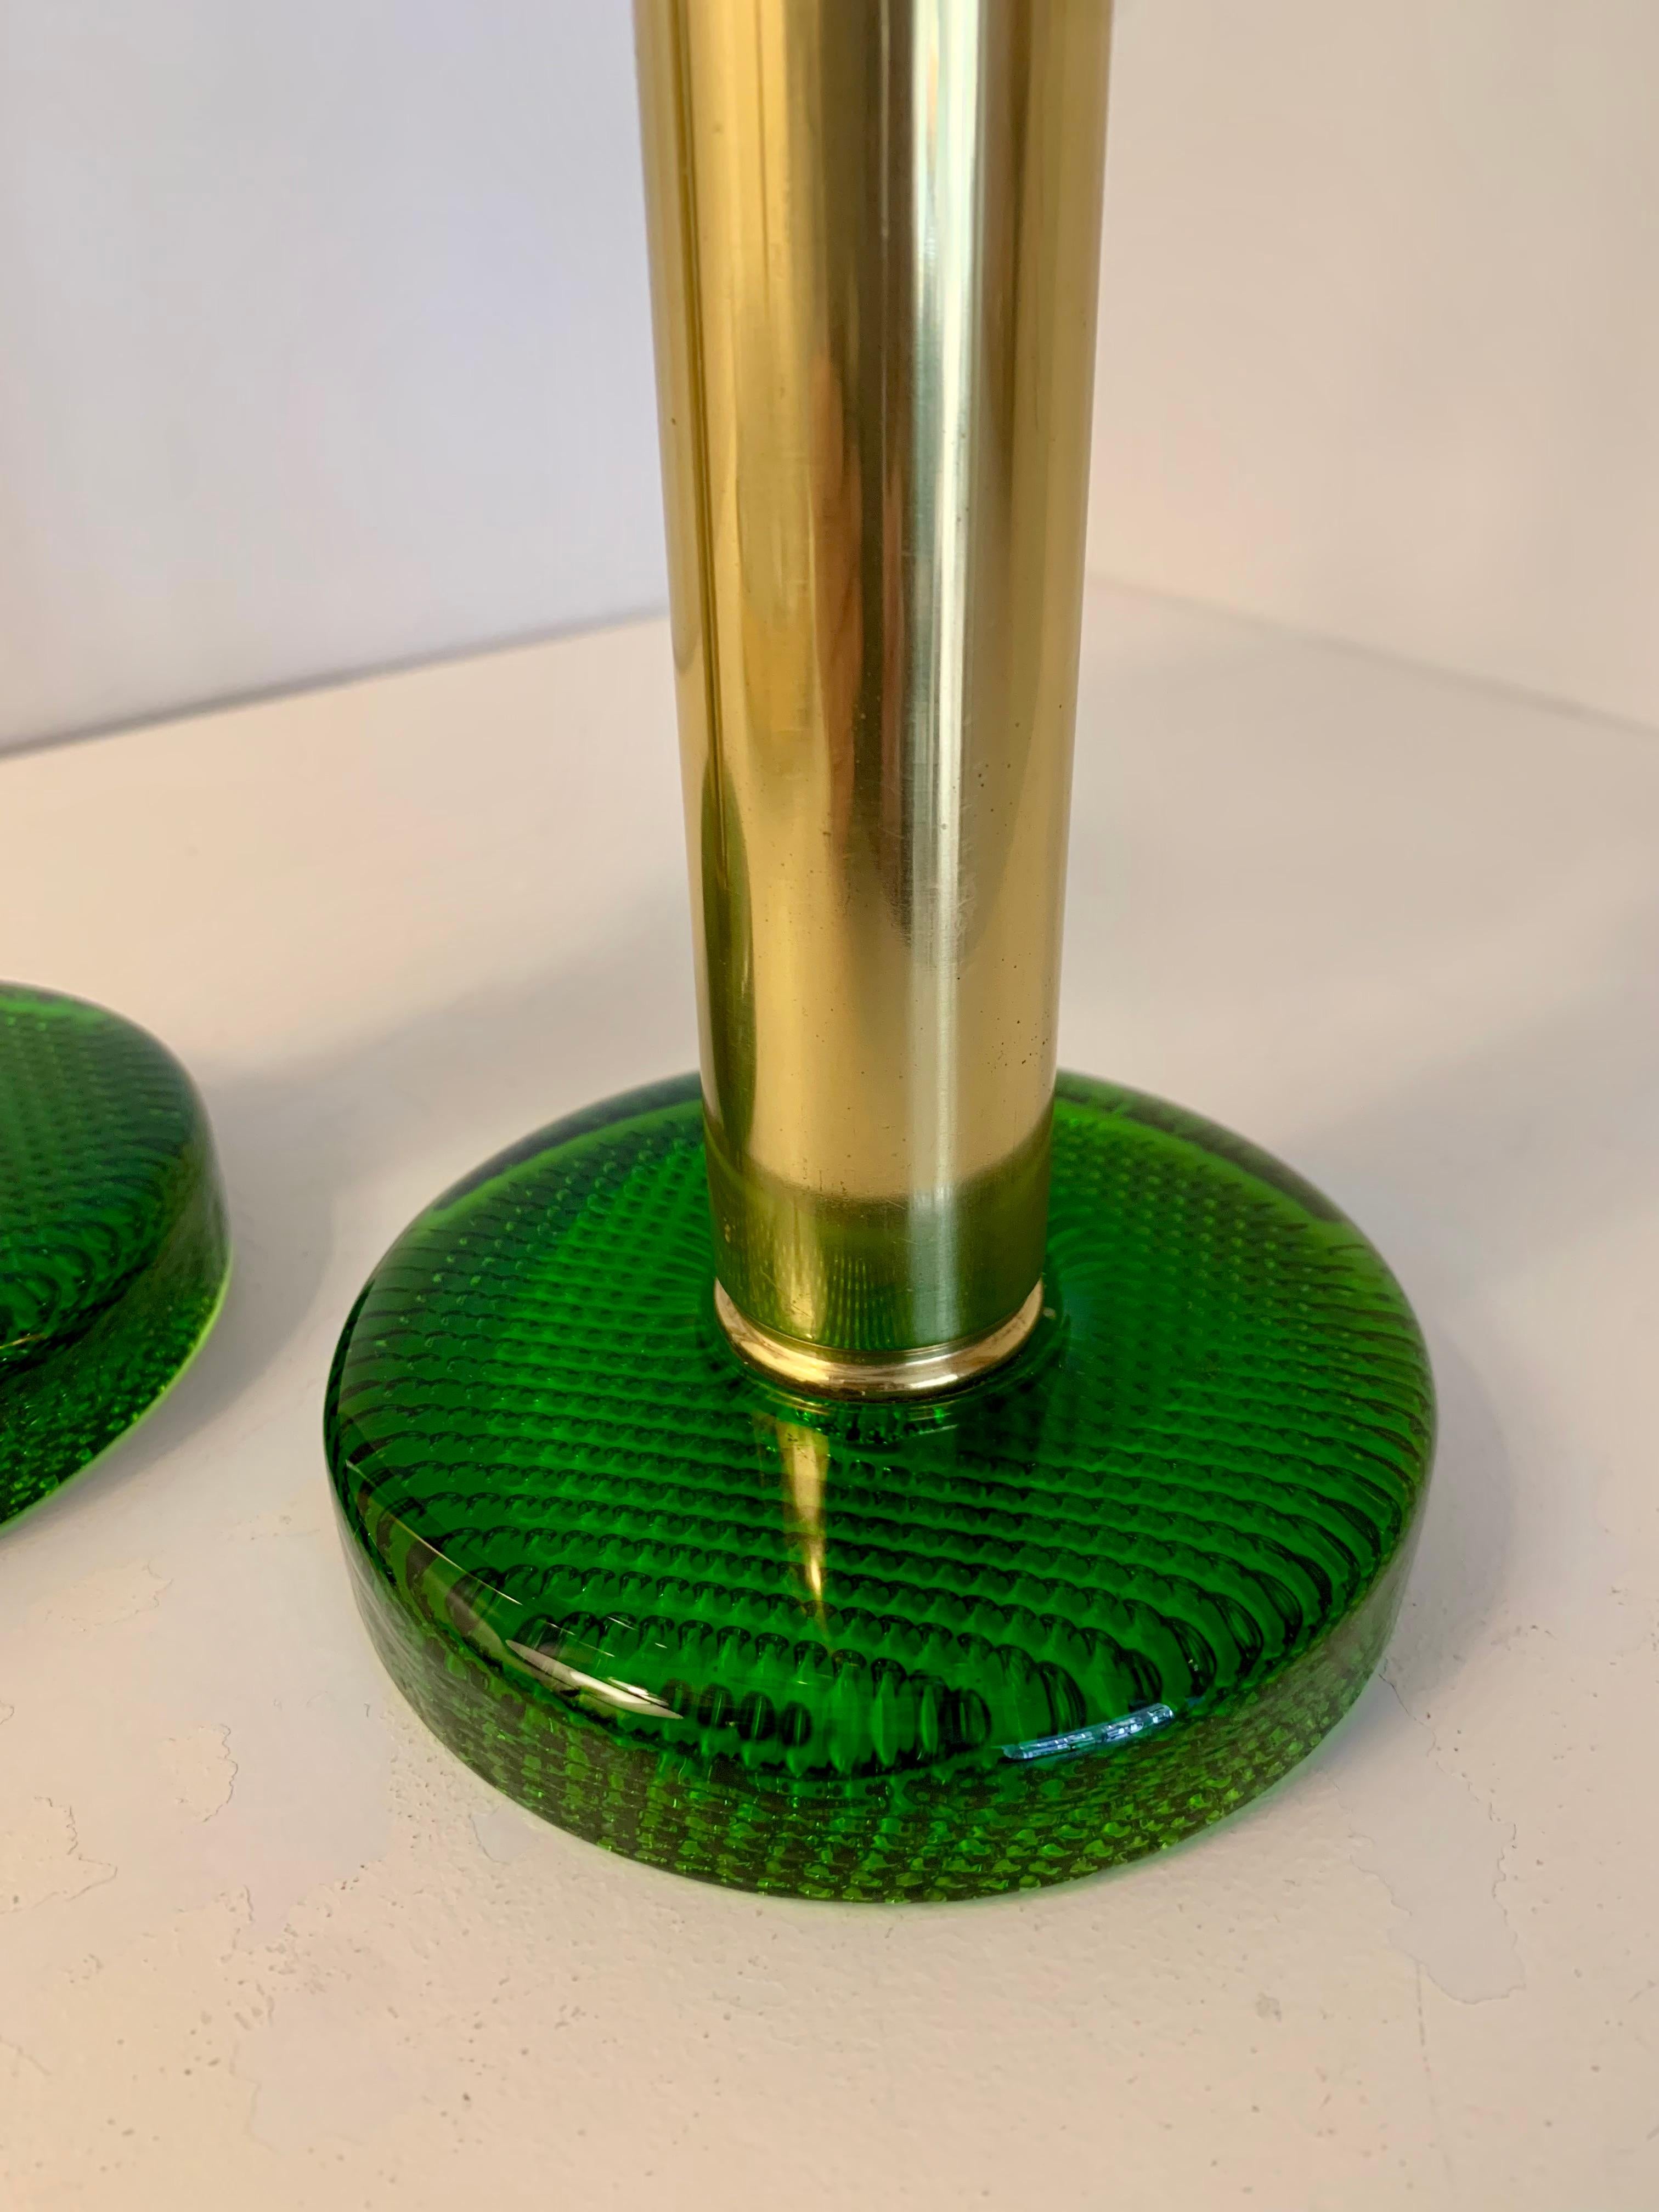 Brass hurricane candle lantern (candle holder) by Swedish designer Hans-Agne Jakobsson with green glass base. 
These candle holders can burn continuously because the brass base interior's are executed with a spring mechanism that pushes the candle